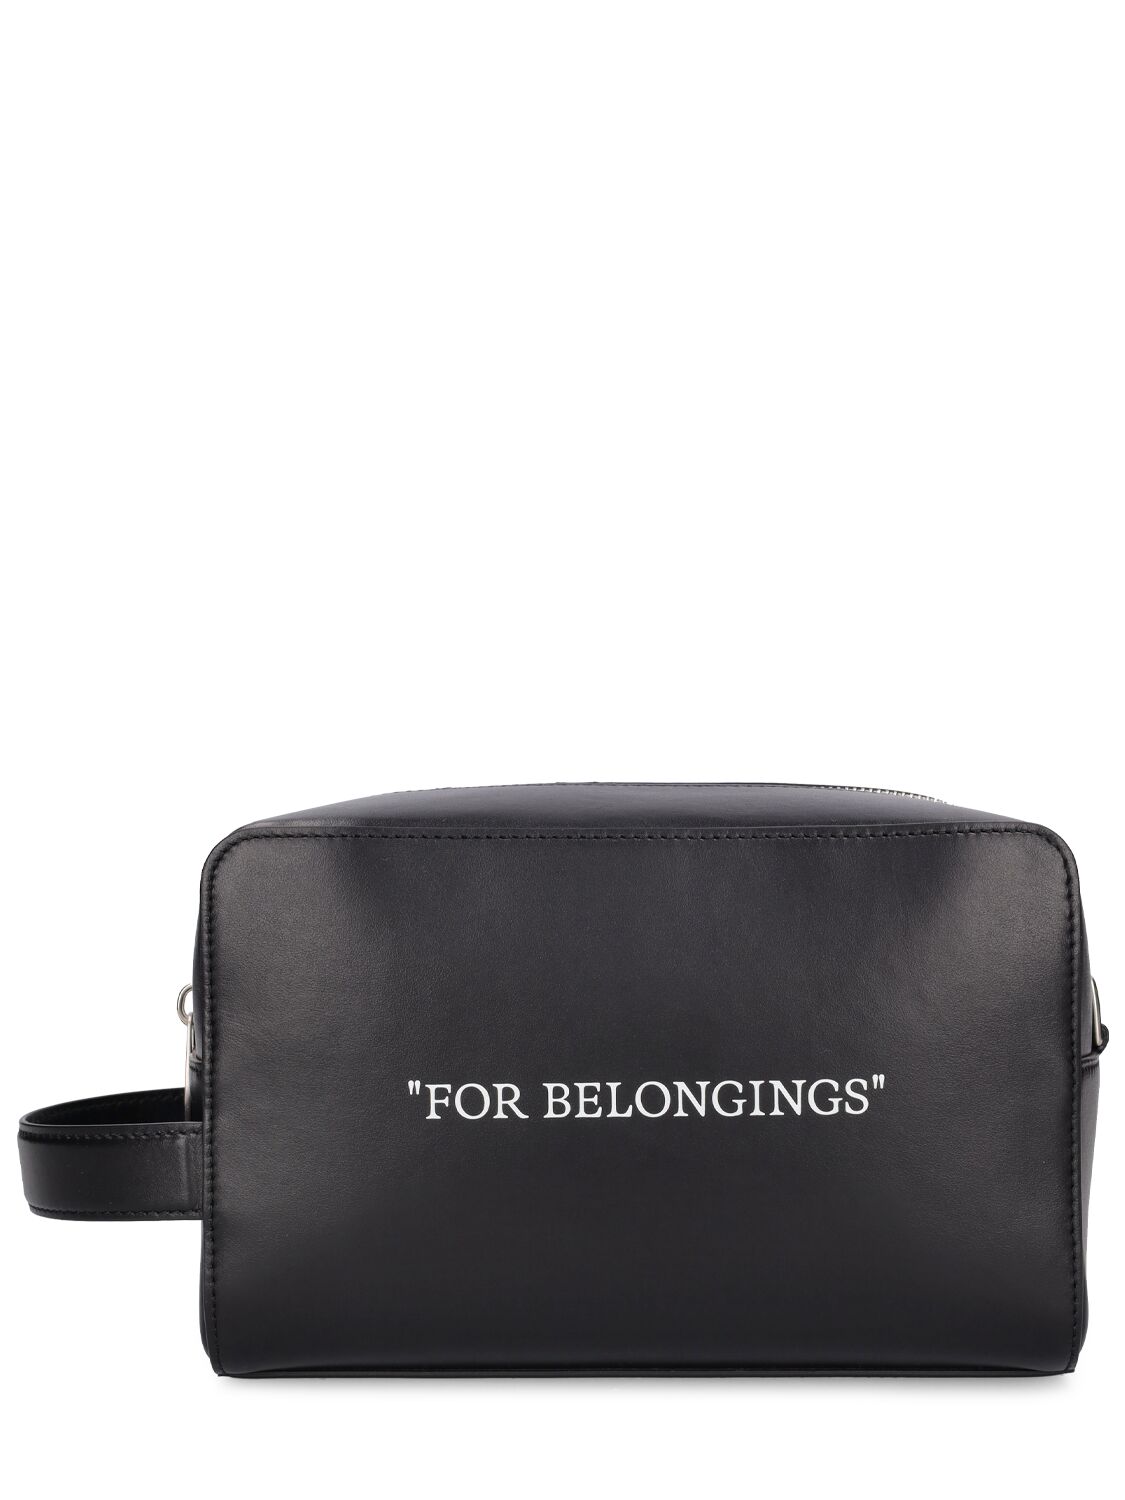 Image of Quote Bookish Leather Toiletry Bag